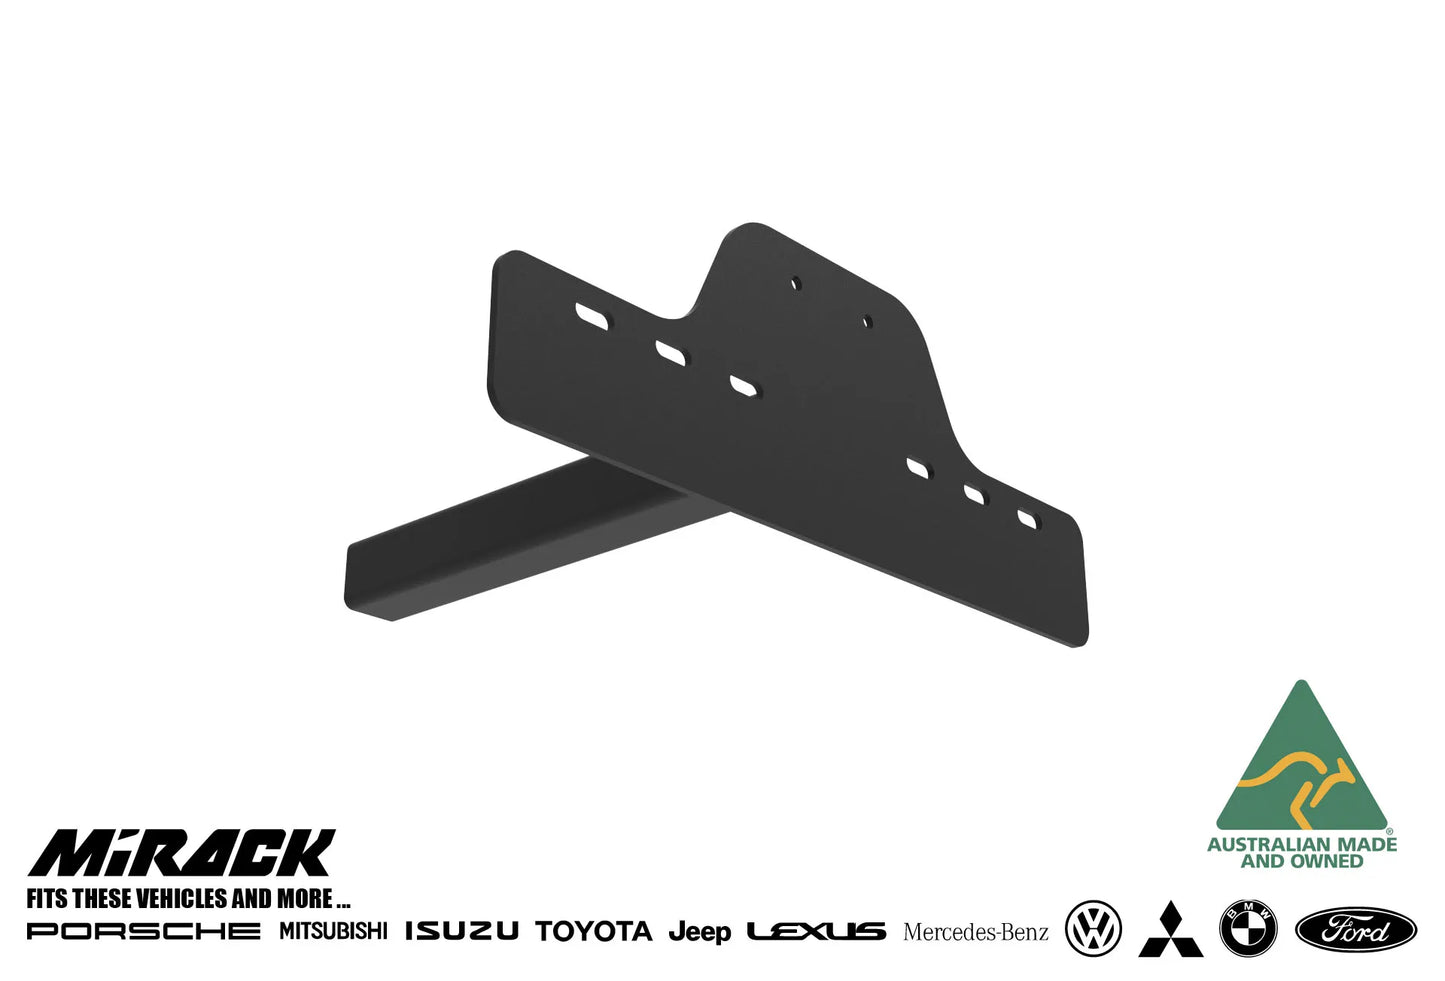 3D visualization: Elevate your ride with Mirack's stylish and secure number plate holders.